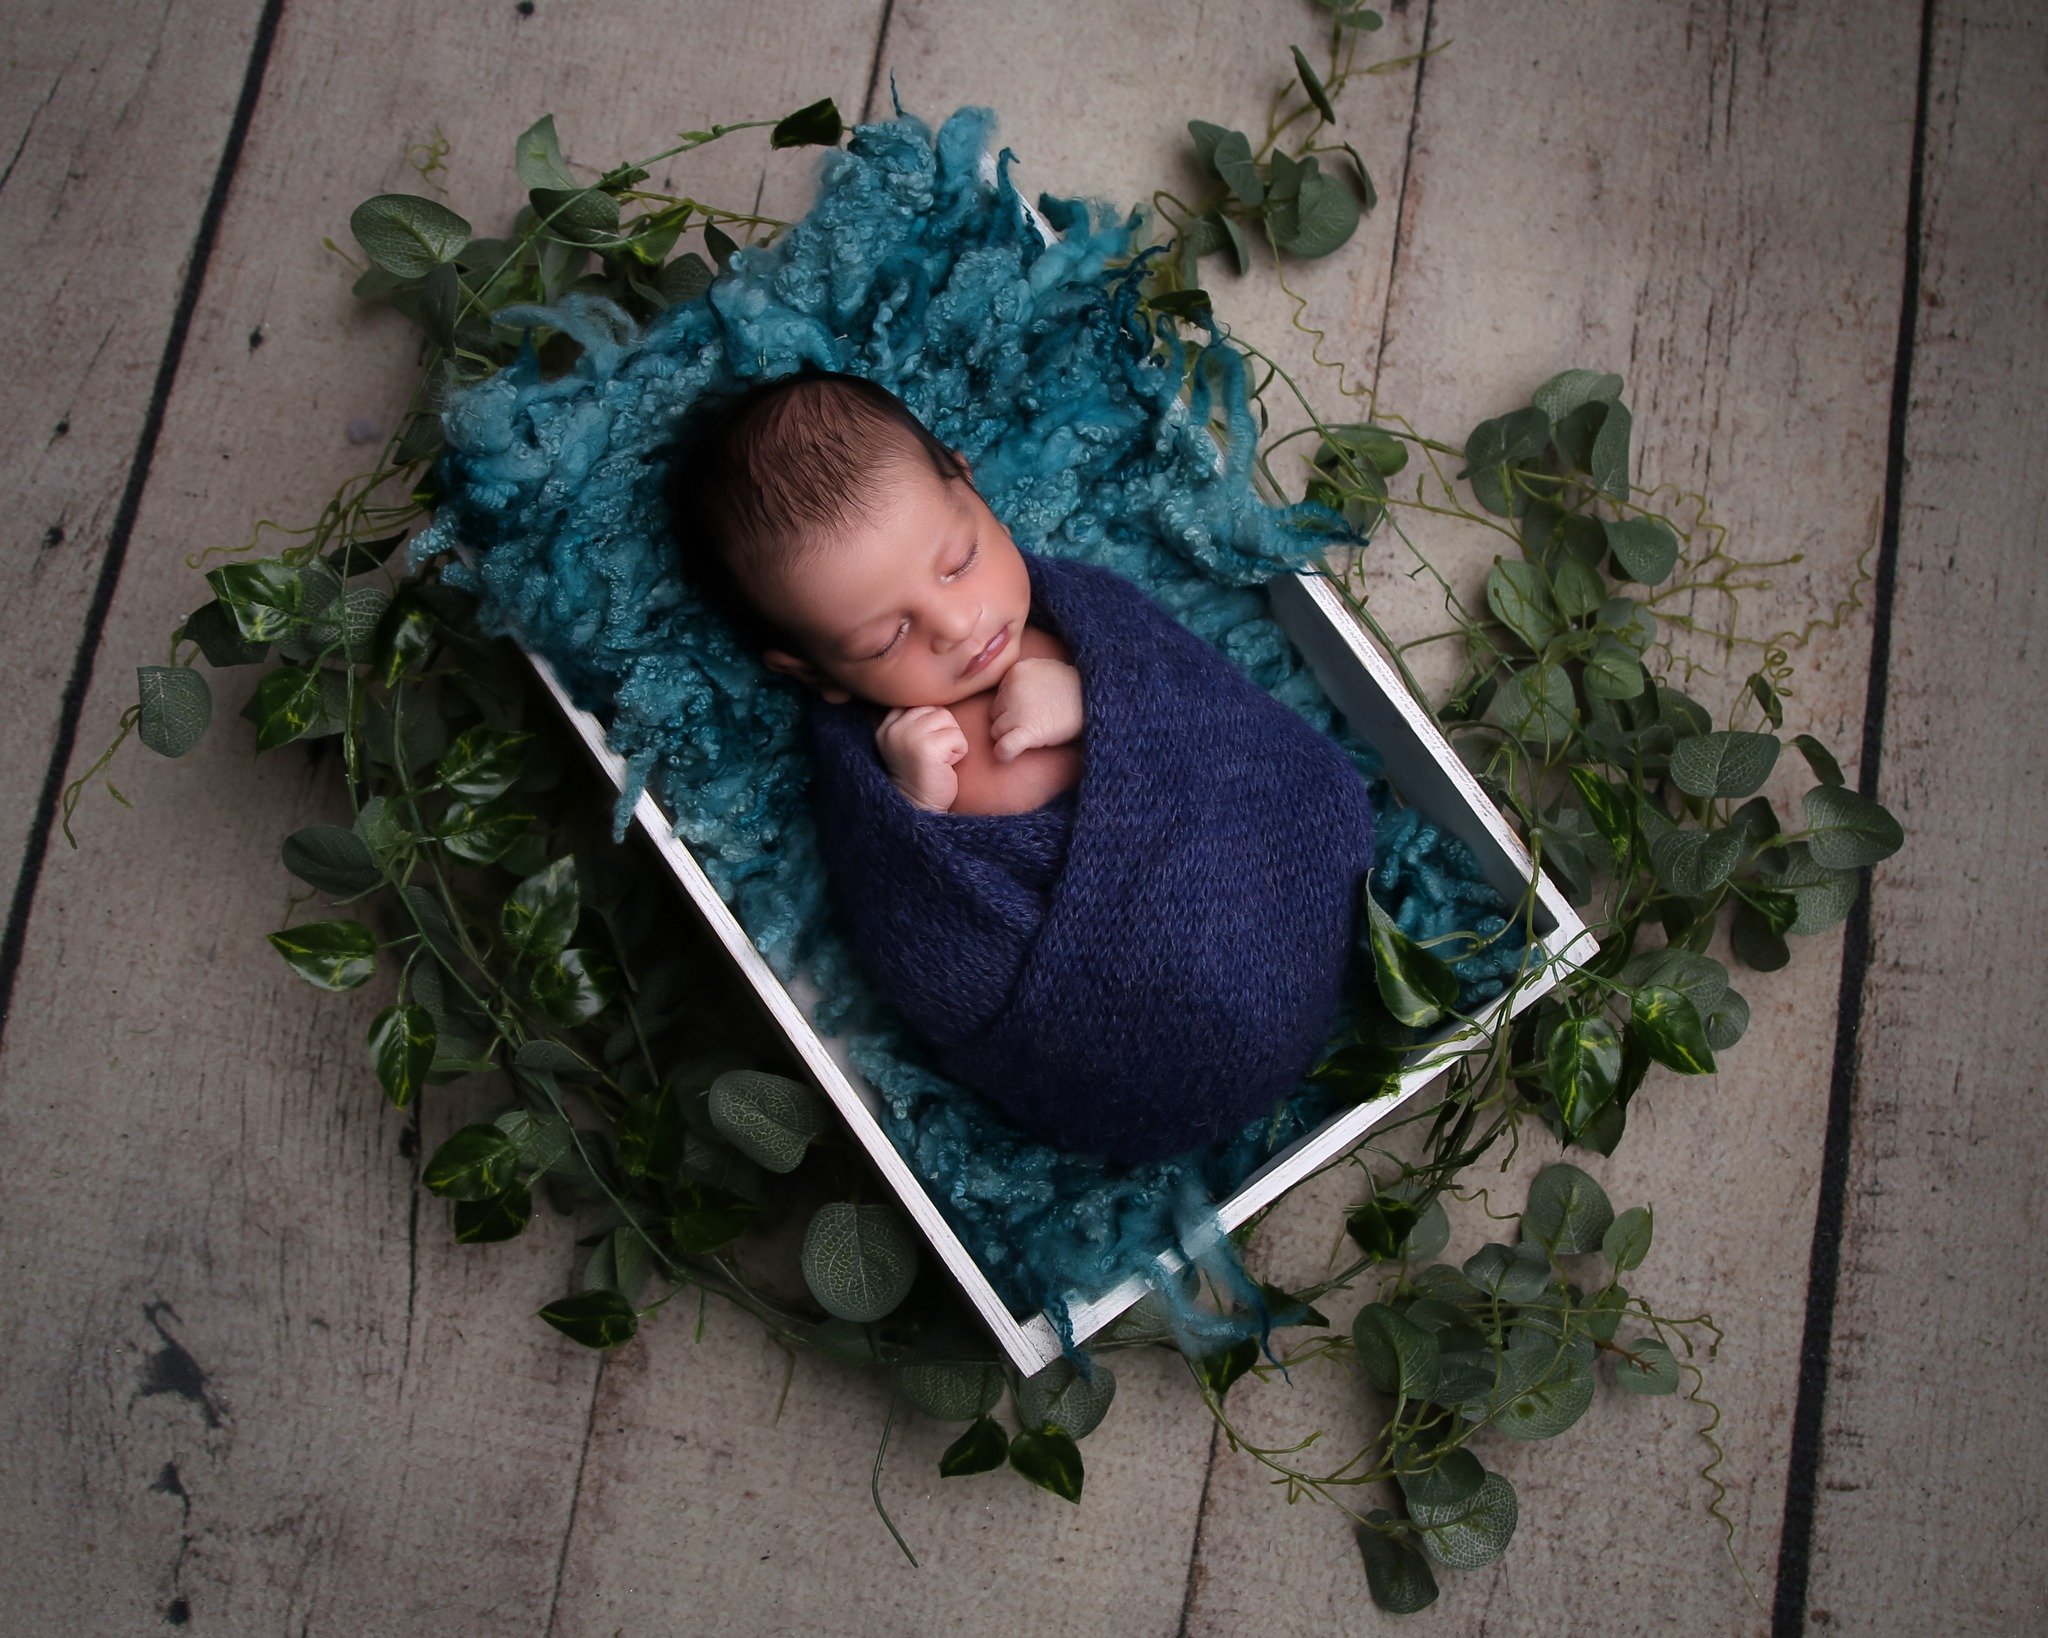 Welcome to the world! We have a range of props and blankets to use in the Newborn Photoshoots that will help show how beautiful your little ones are.

Photographed by Emily

#Zellig #indigbeth #newbornbaby #newbornphotoshoot #newbornprops